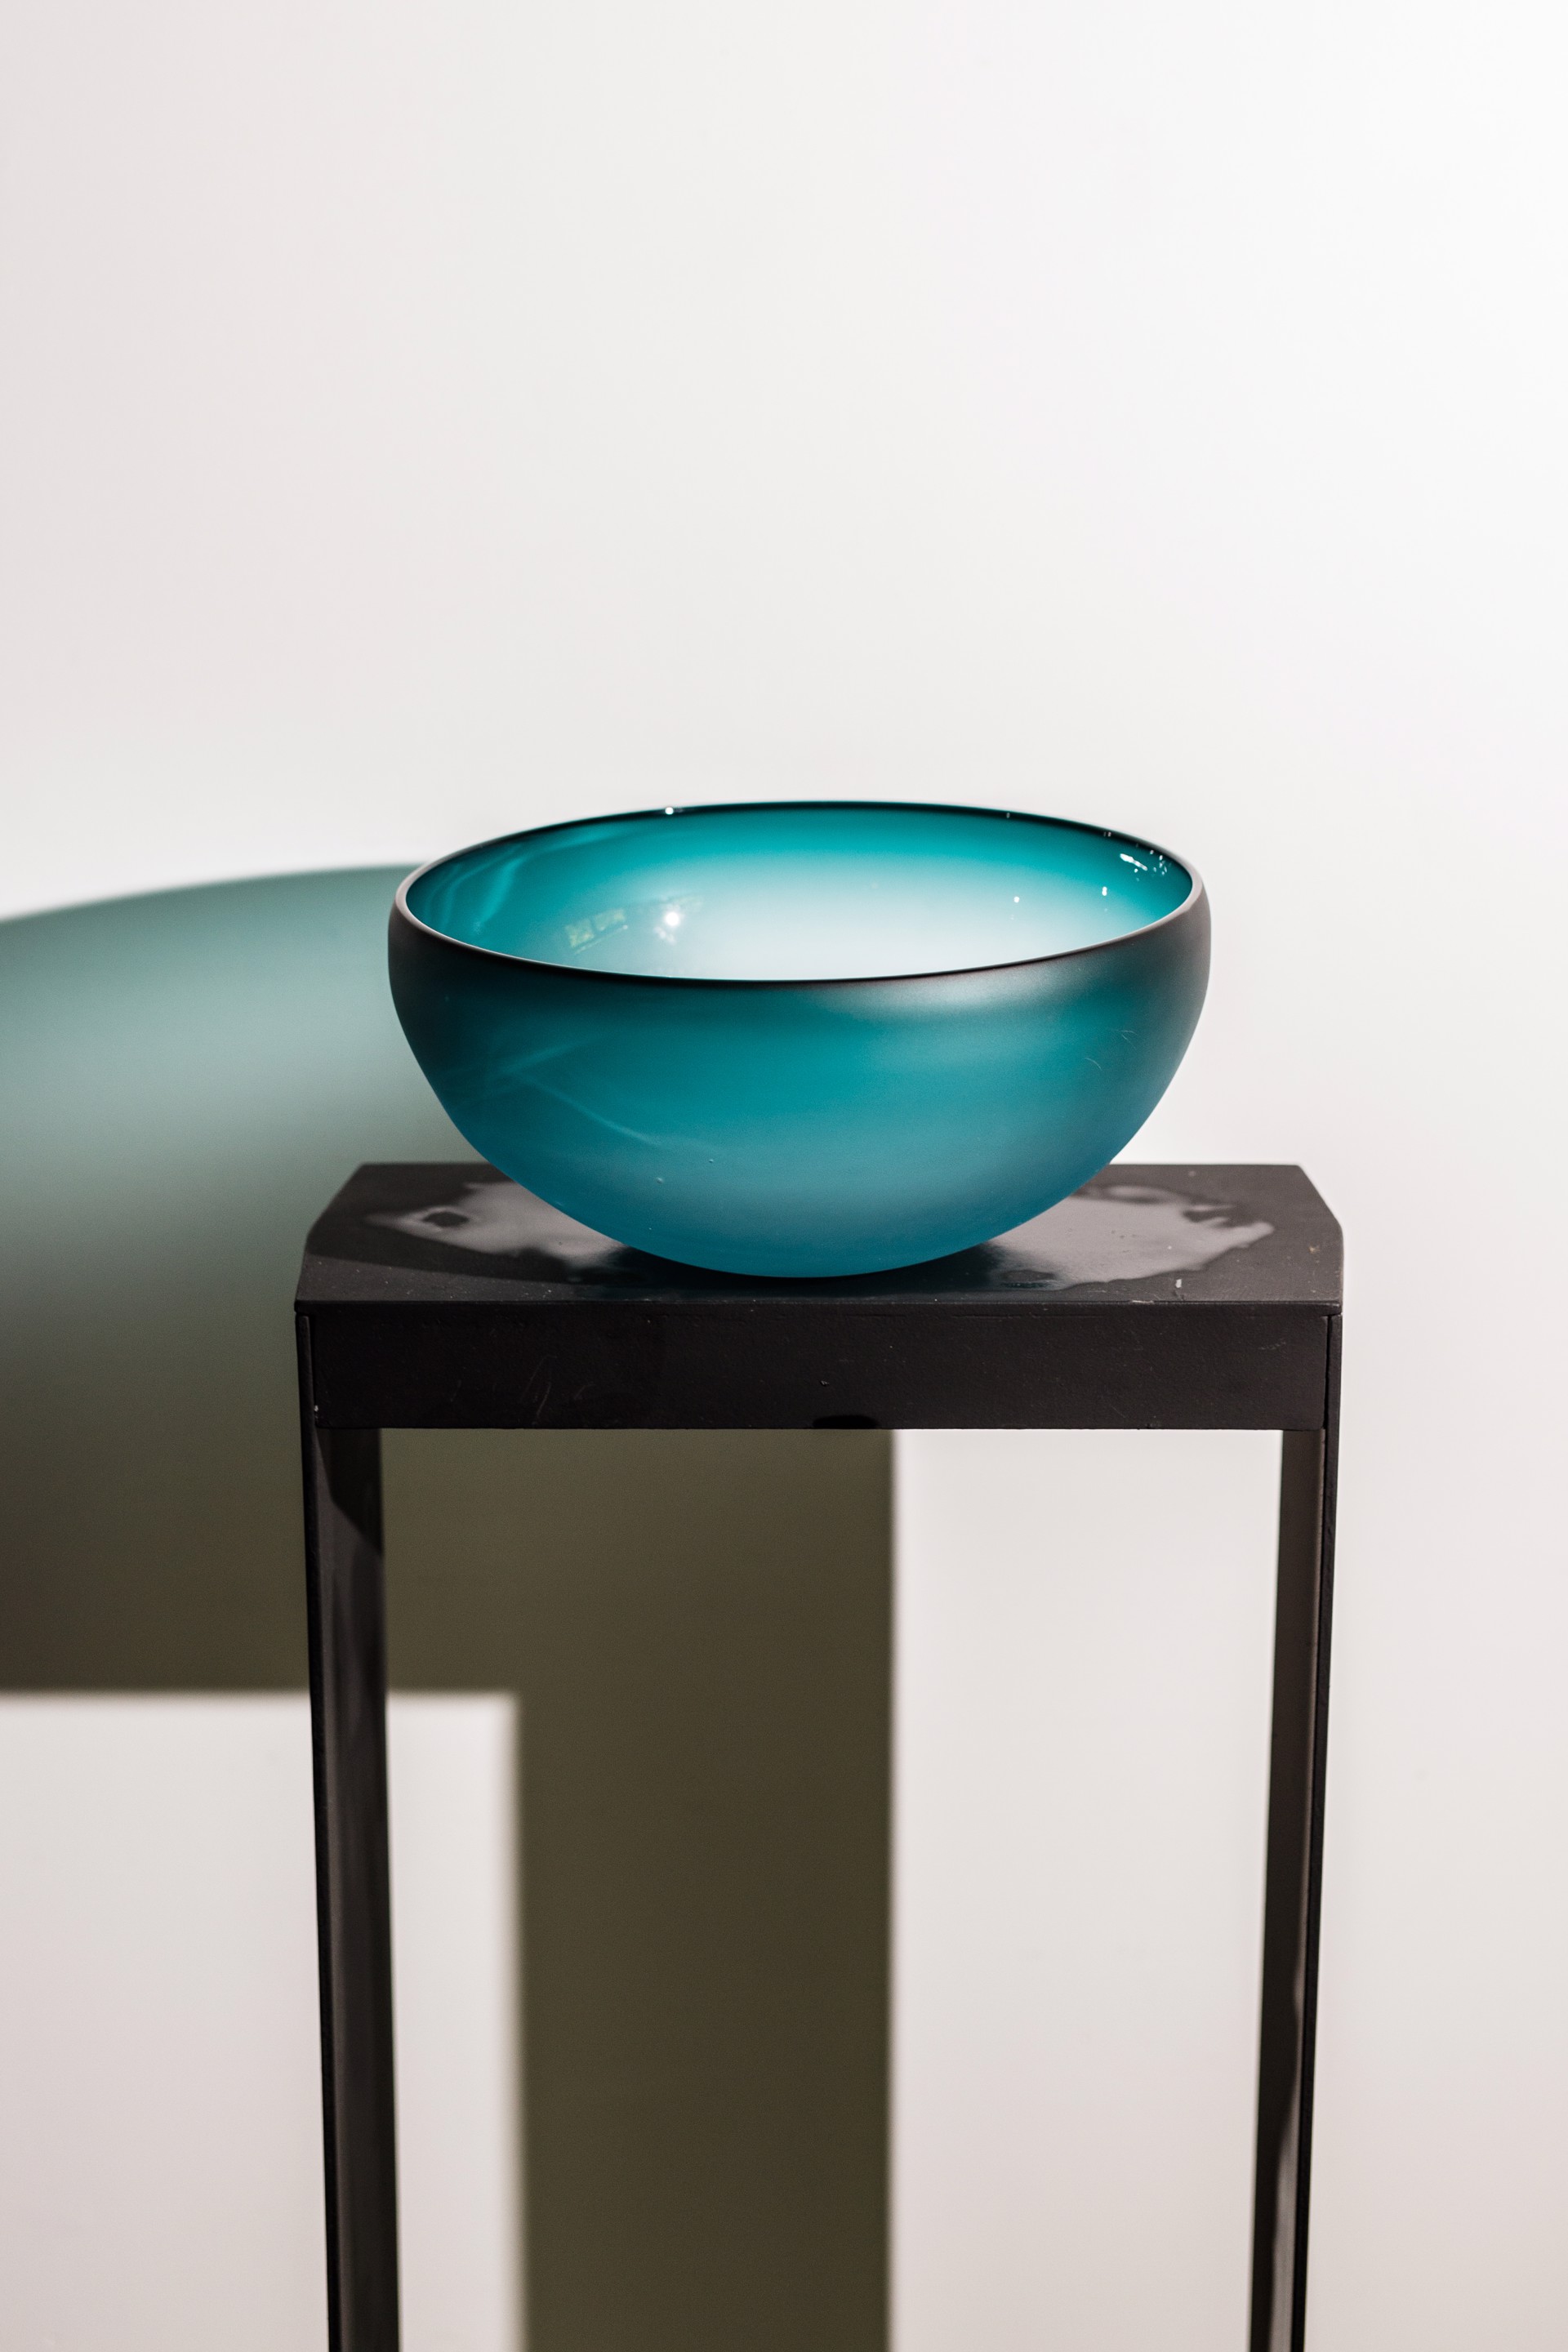 Large Frosted Teal Punch Bowl by Ruth Allen